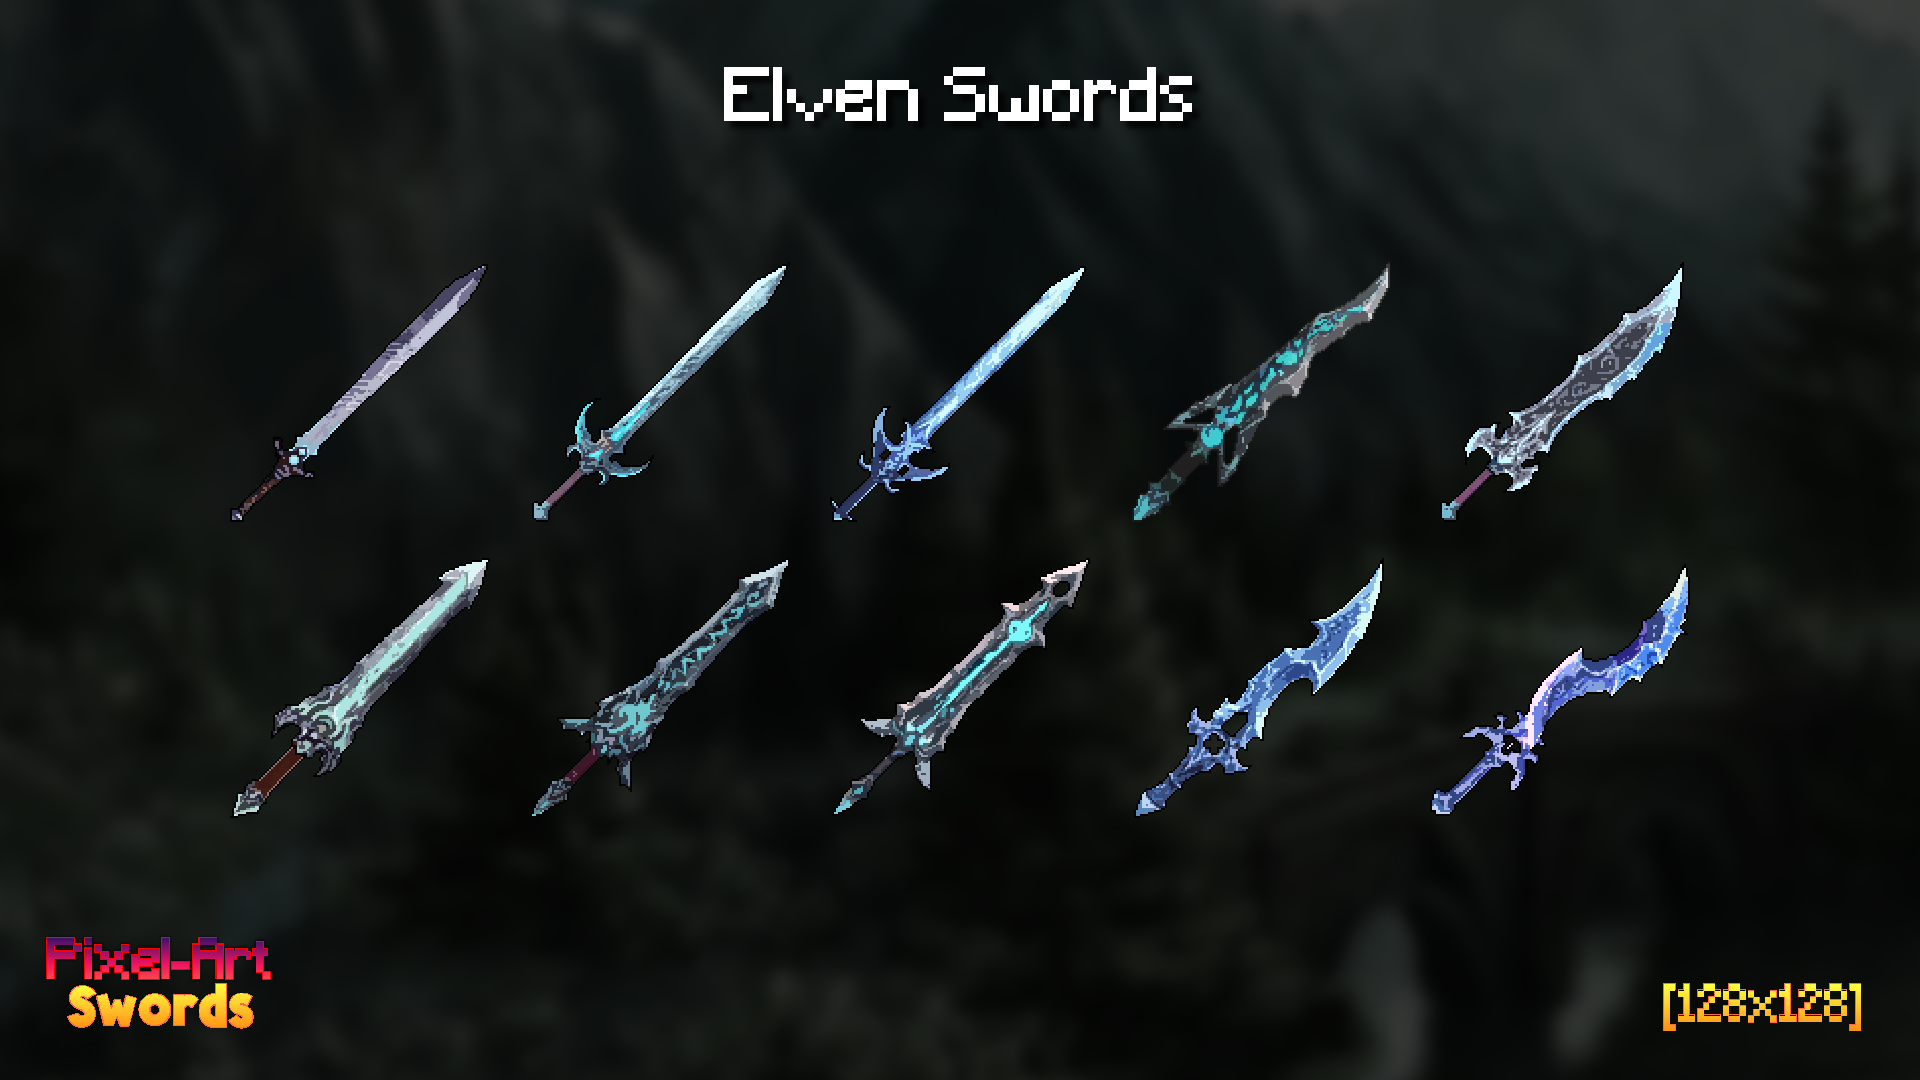 Pixel-Art Swords [128x128] by King Game Assets